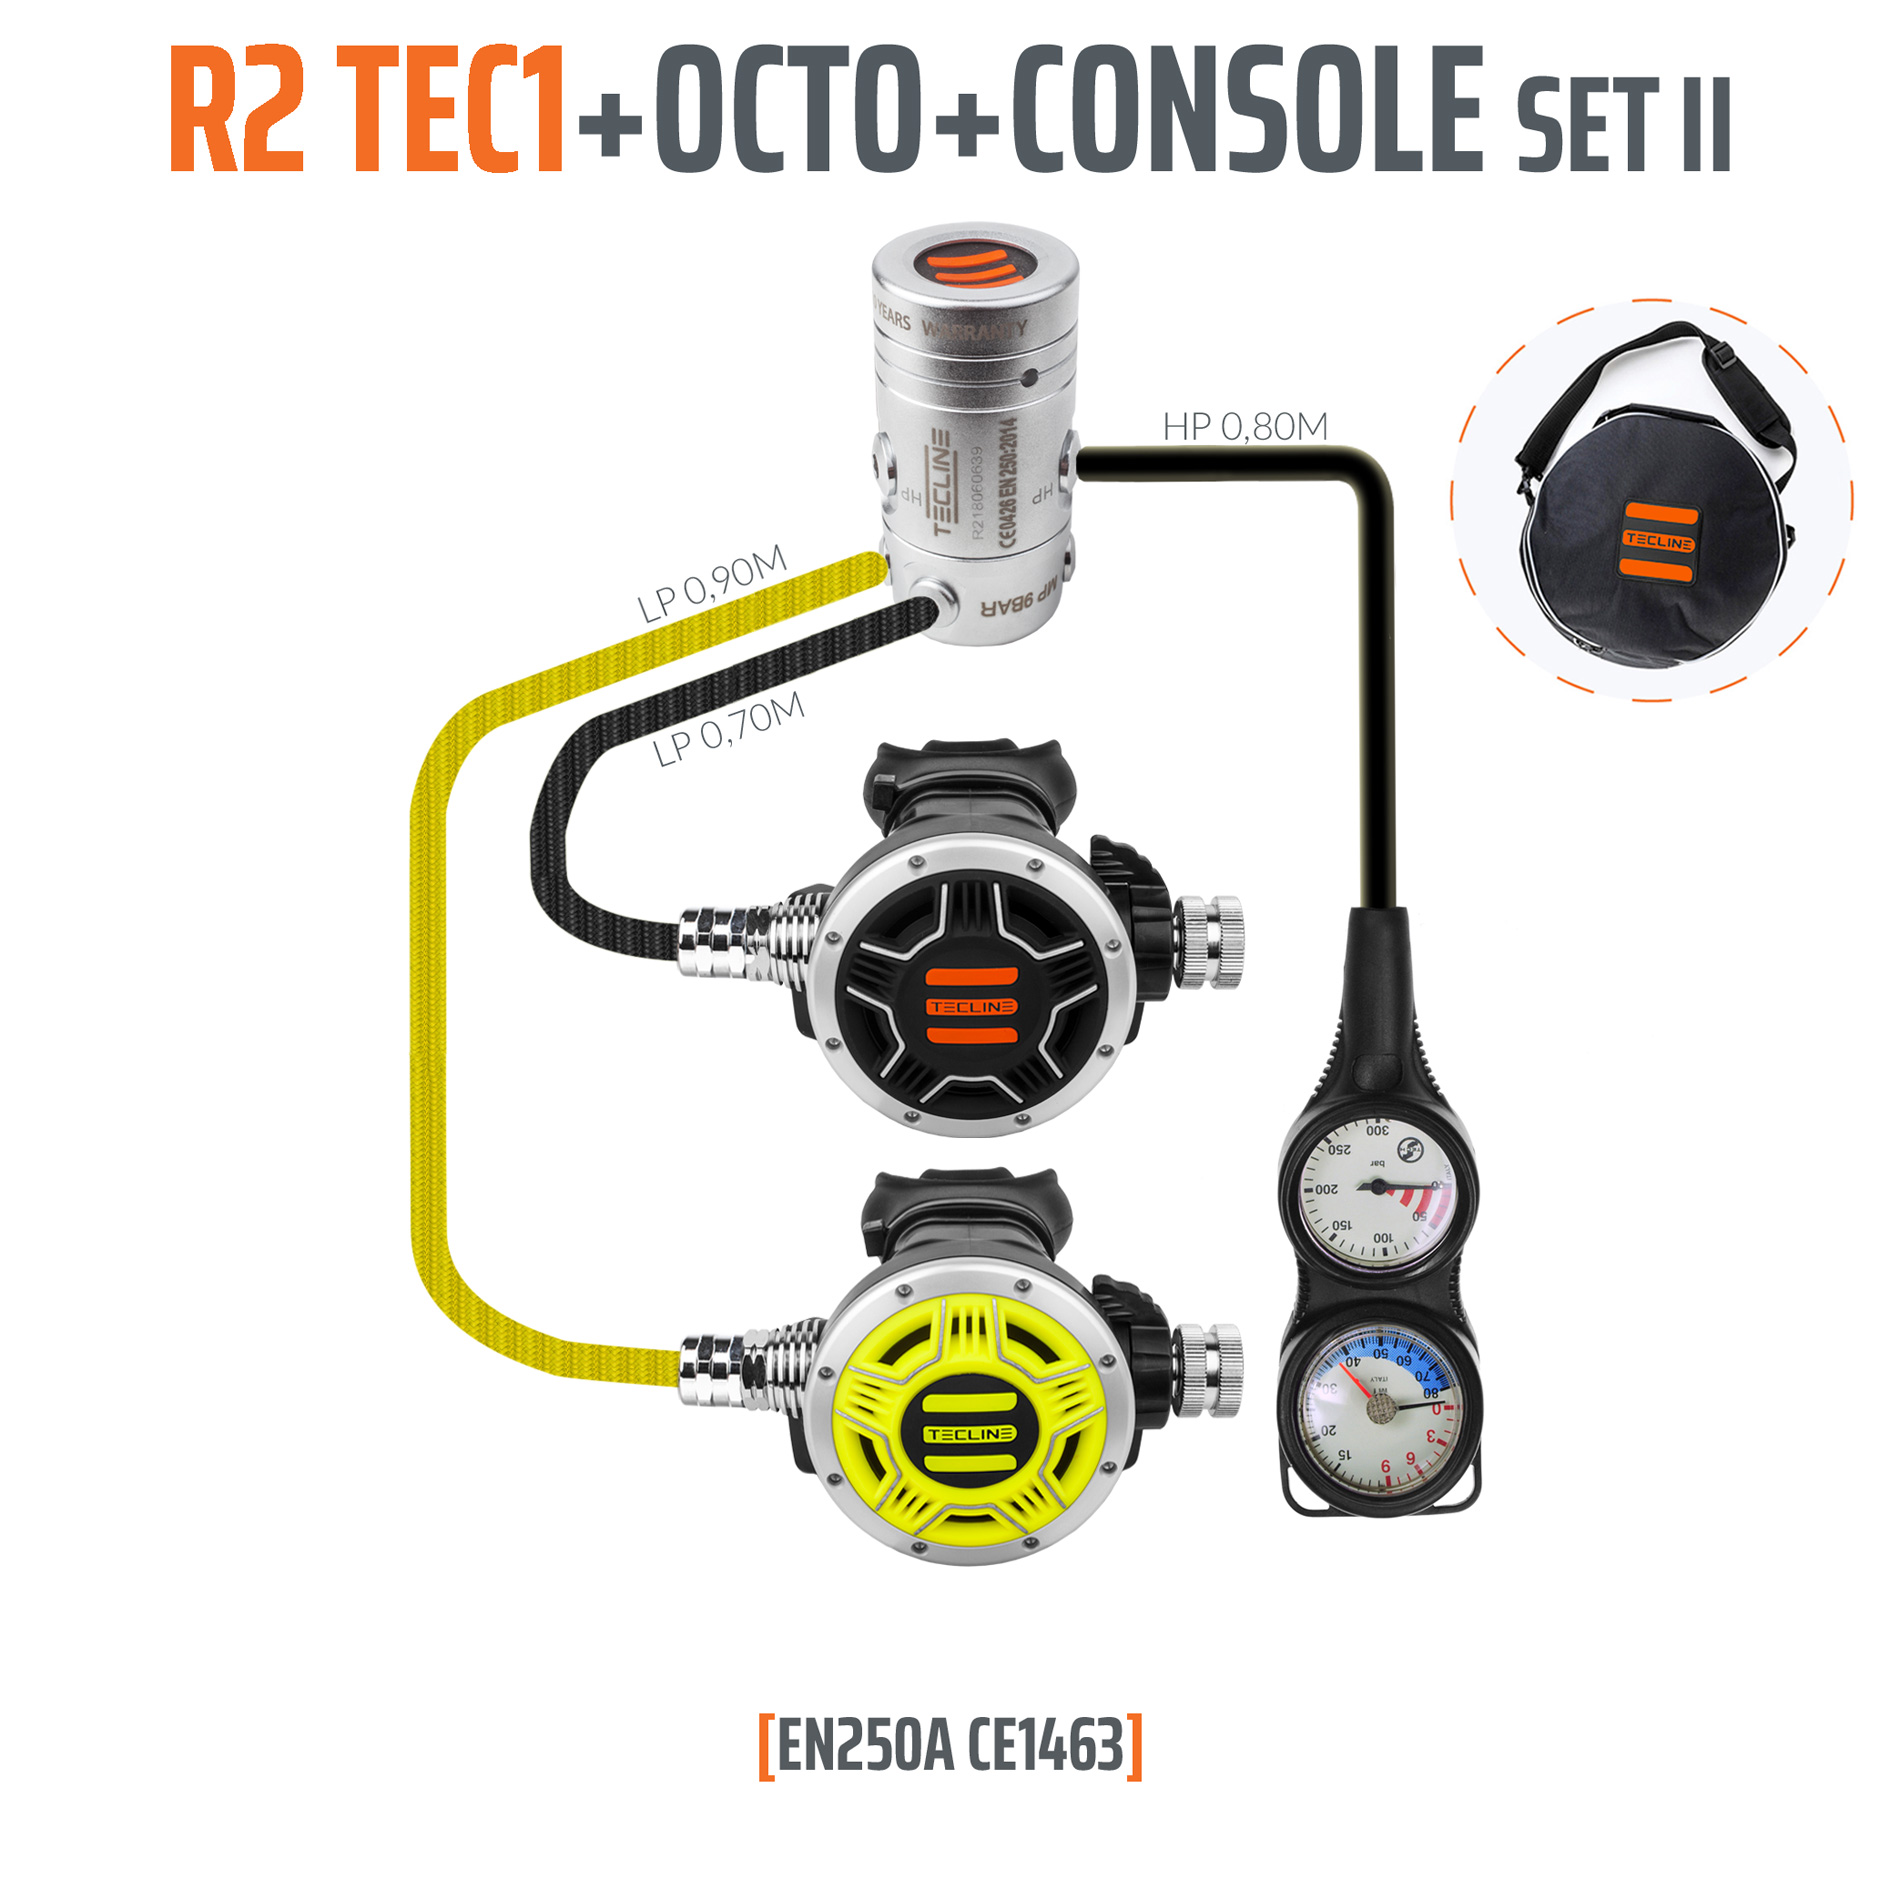 TECLINE REGULATOR R2 TEC1 SET II WITH OCTO AND 2 ELEMENTS CONSOLE